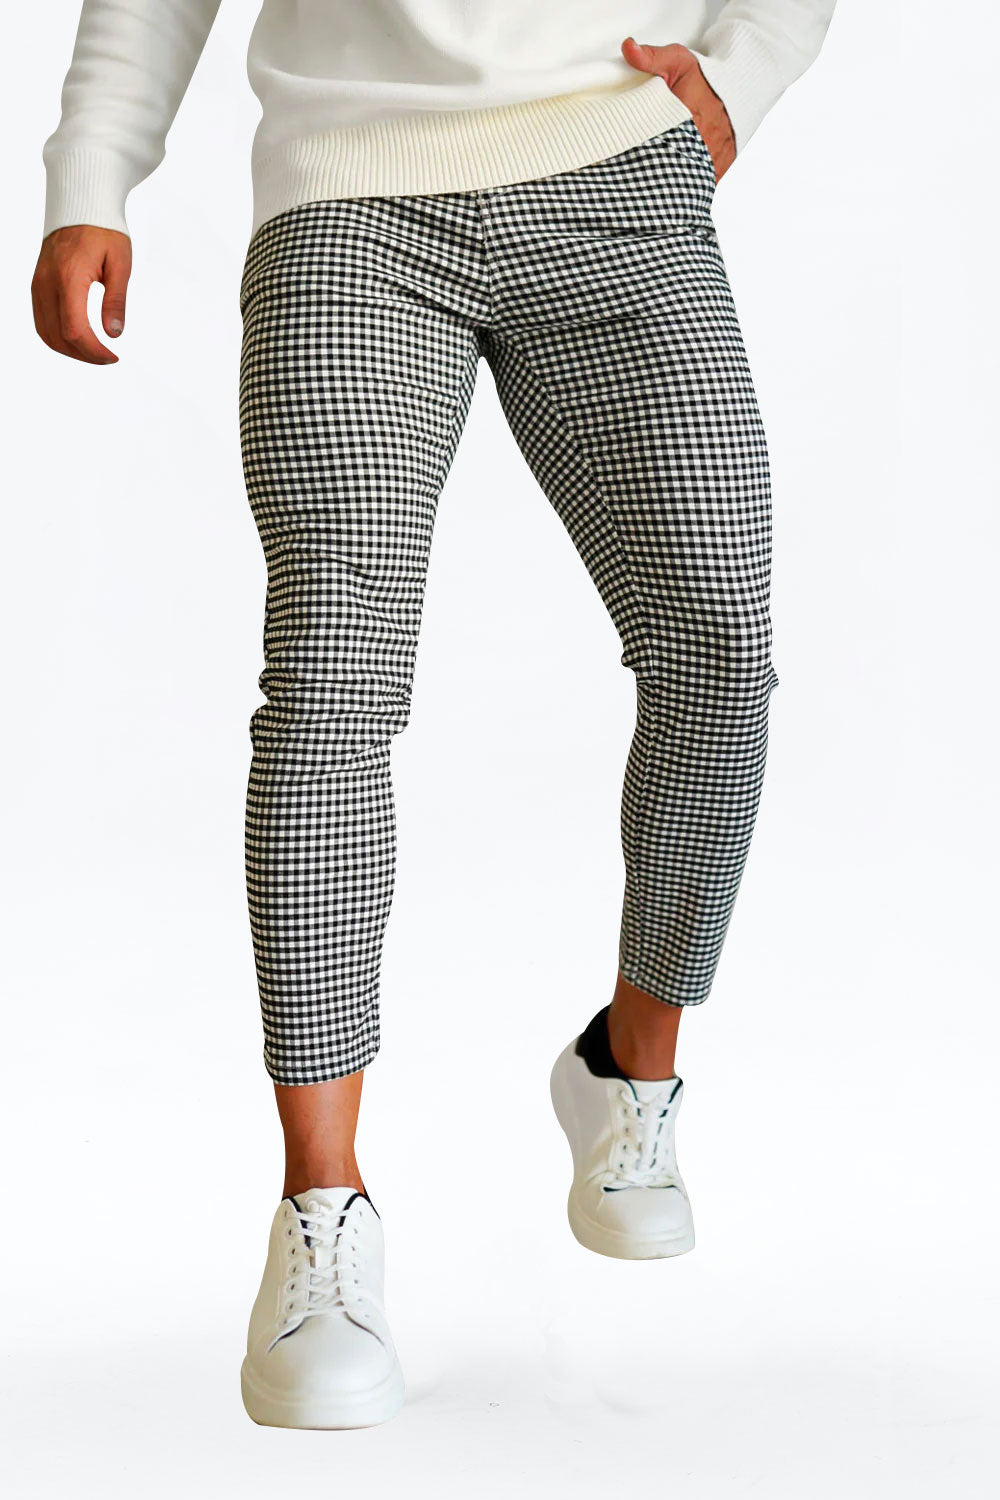 Gingtto Mens Comfortable Skinny Lattice Chinos With Good Quality